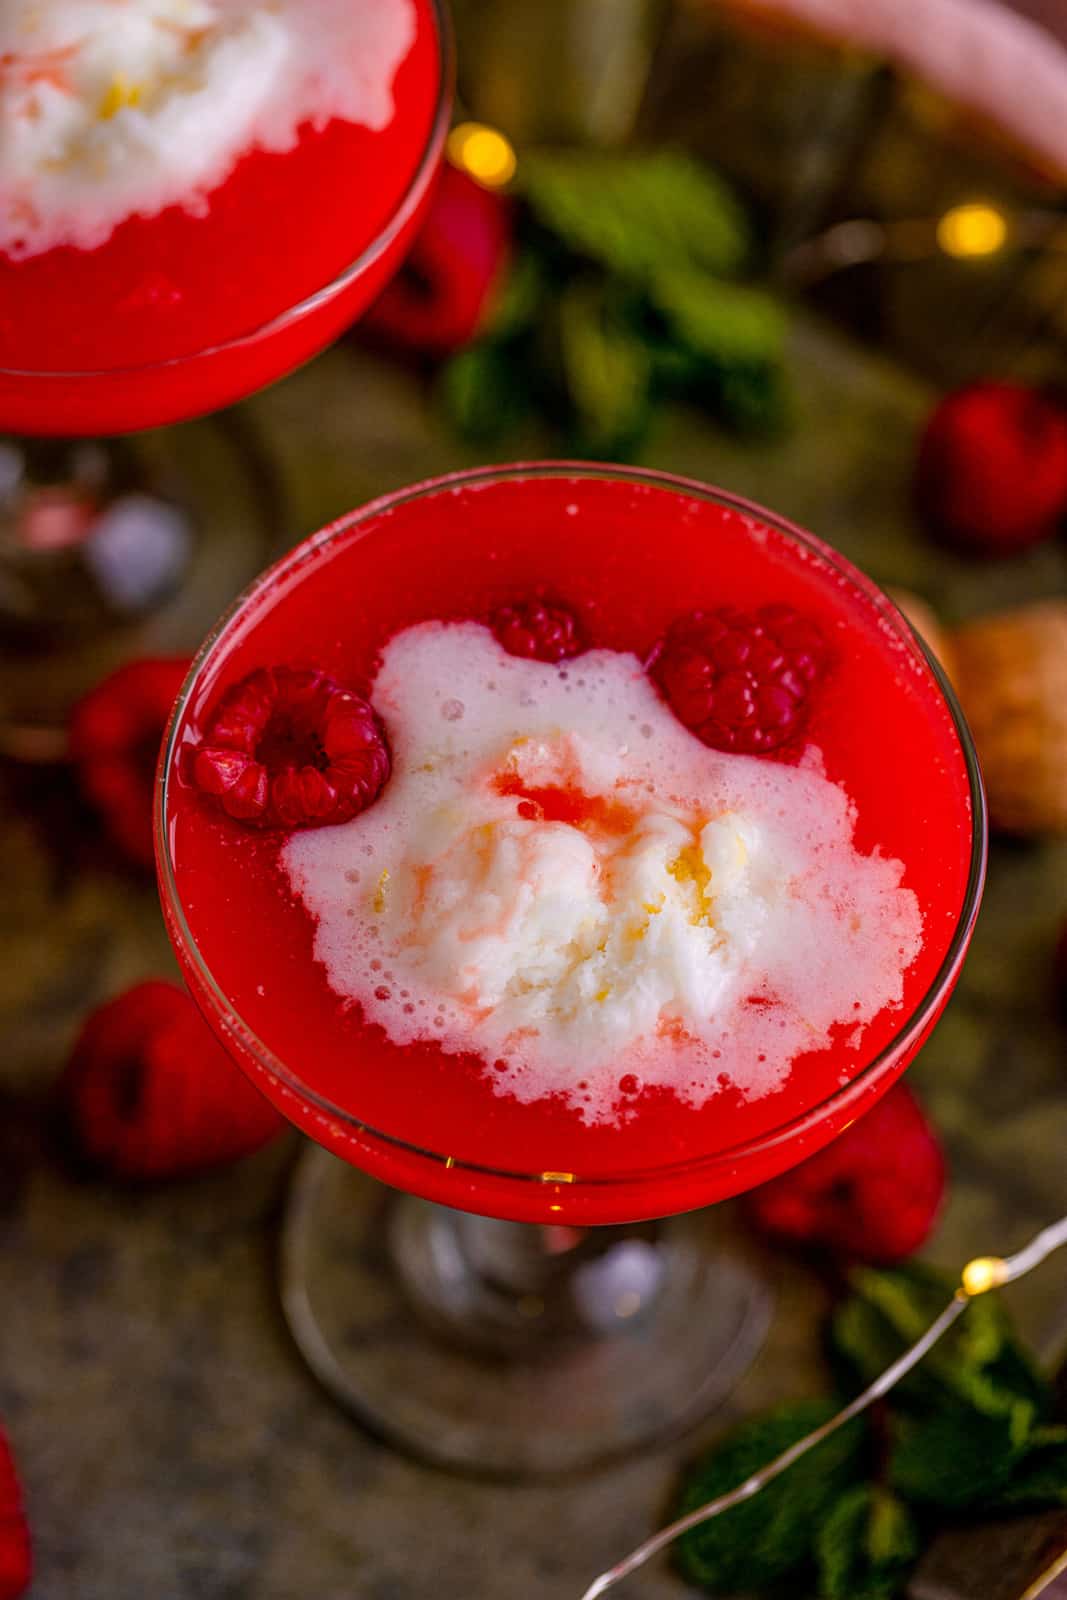 Close up overhead of a glass of Boozy Pineapple Punch with sherbet and raspberries.